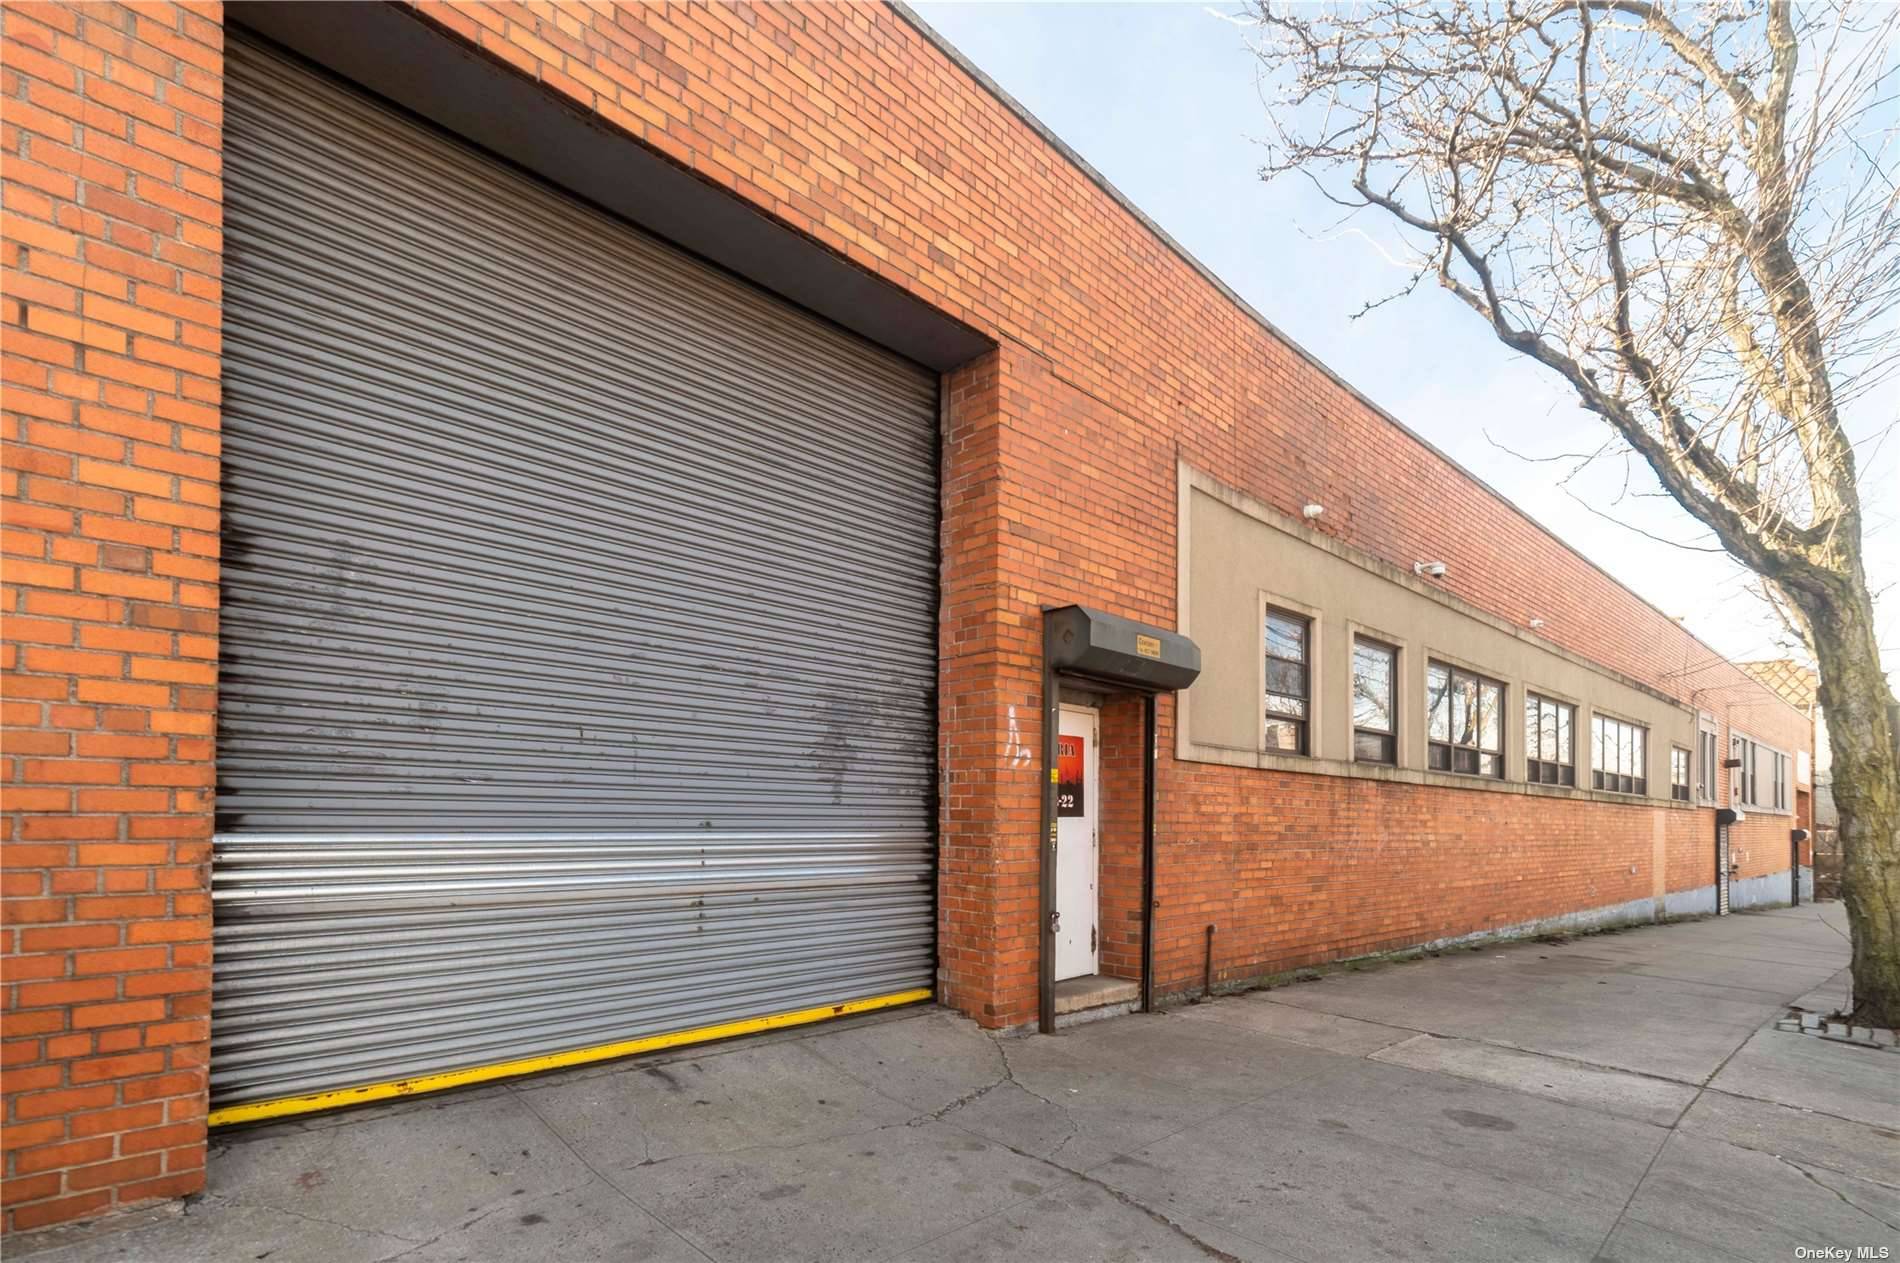 Introducing a rare find a 7, 743 sq ft warehouse office space in Maspeth.